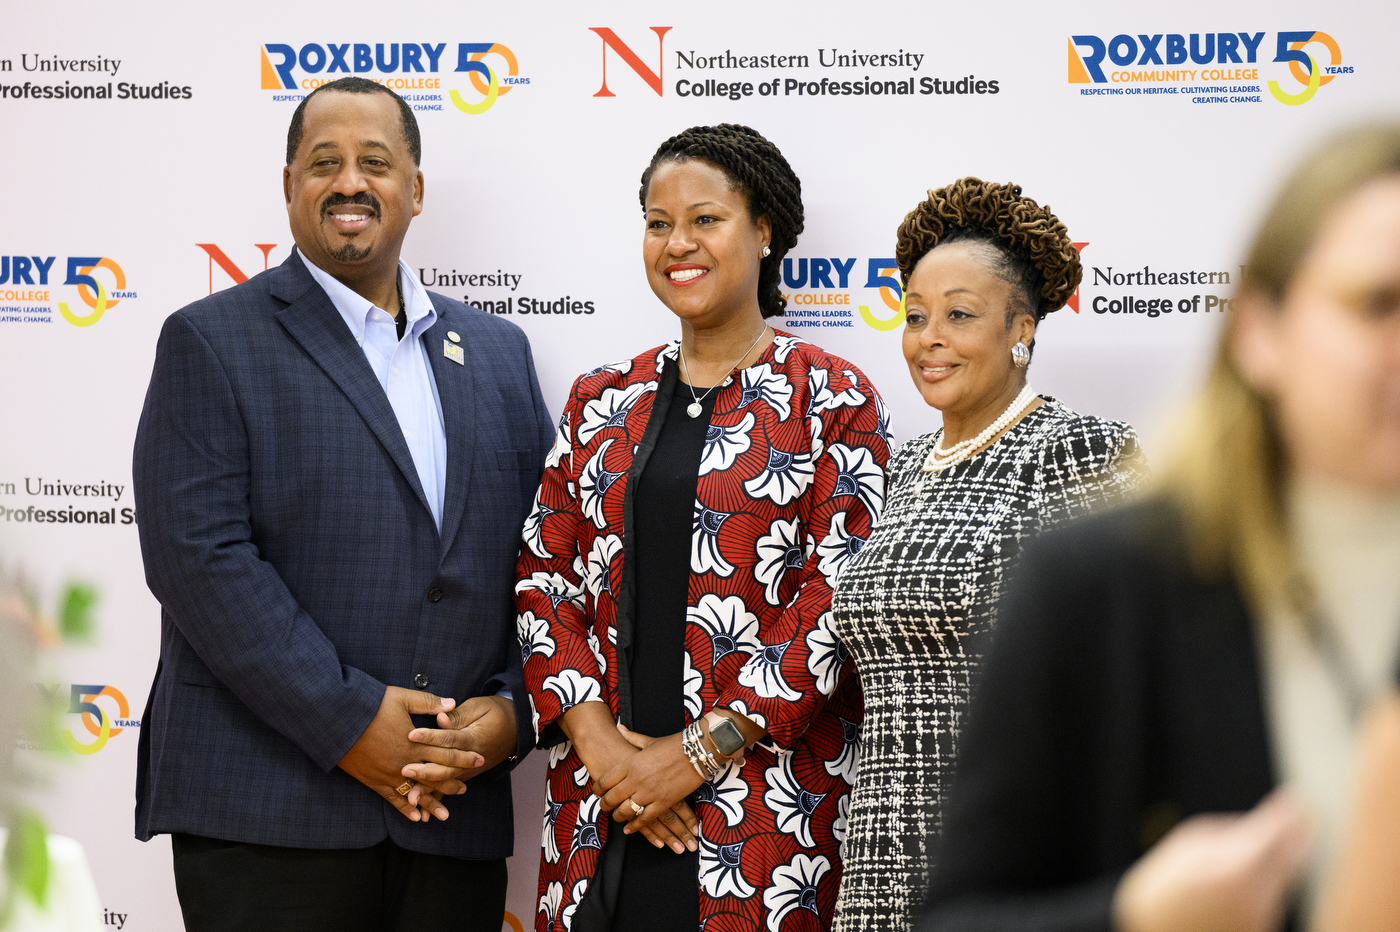 Three people posing together in front of a photo background with Northeastern University College of Professional Studies and Roxbury Community College logos on it.